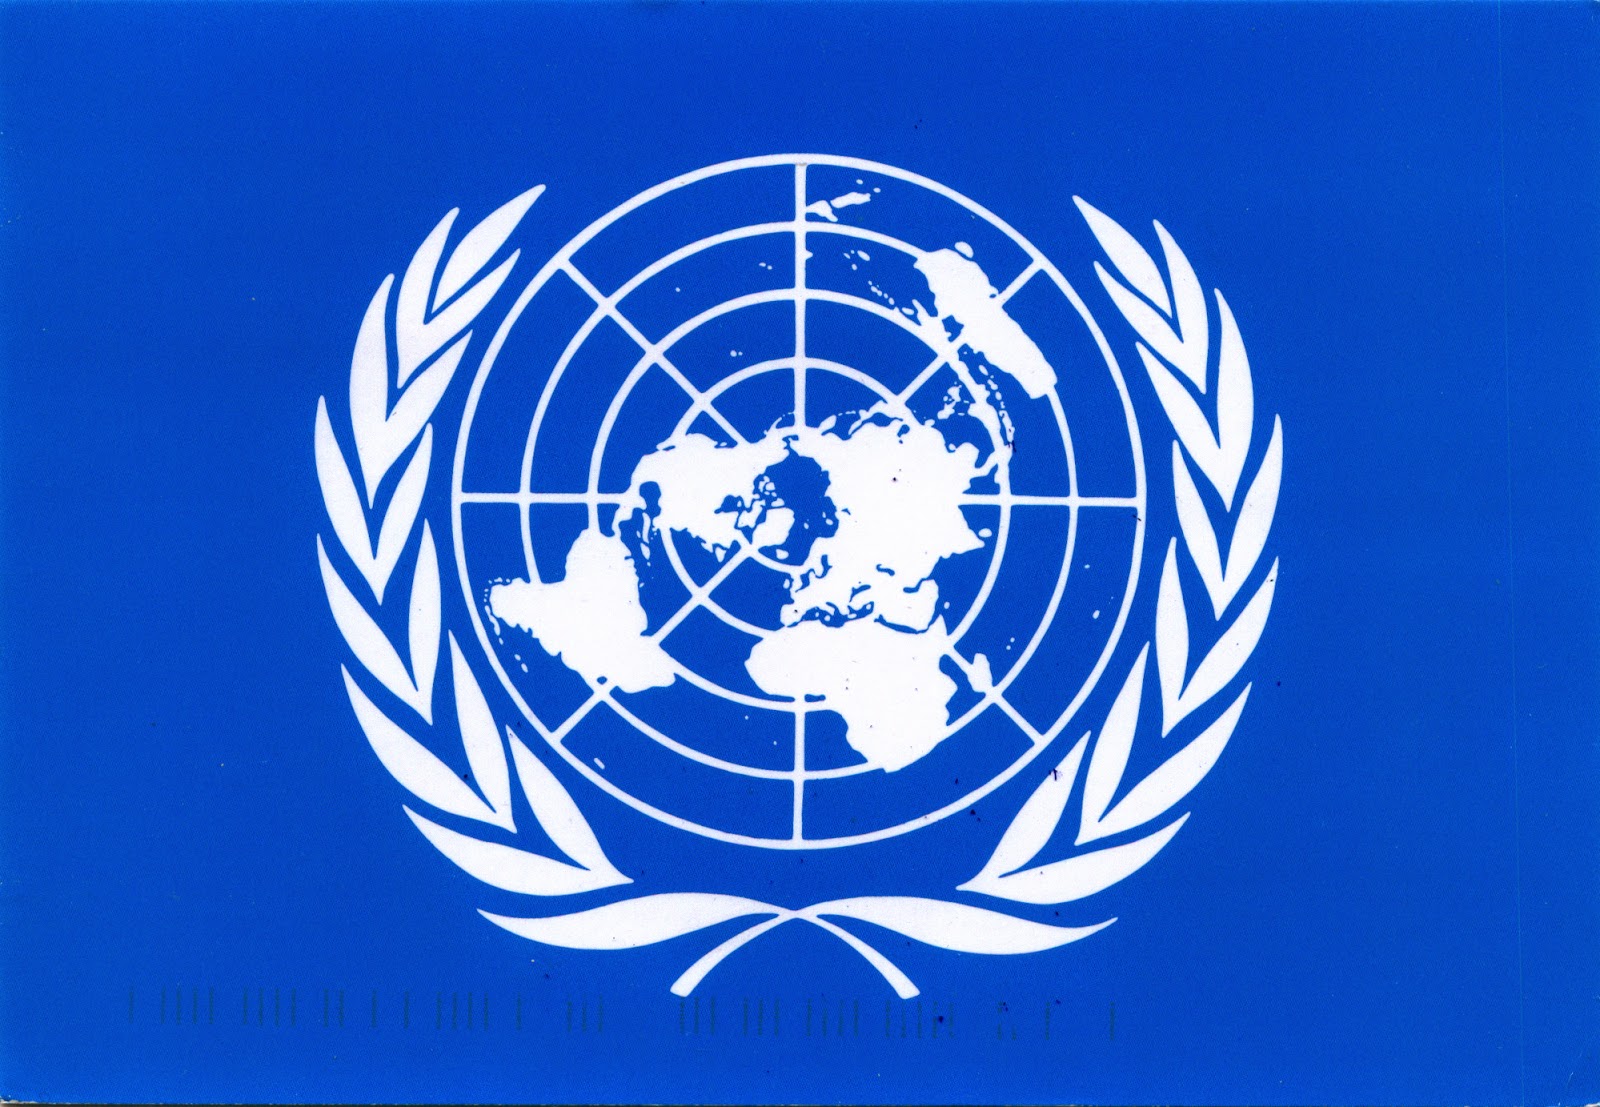 WORLD, COME TO MY HOME!: 1174-1176 UNITED NATIONS - The flag of the